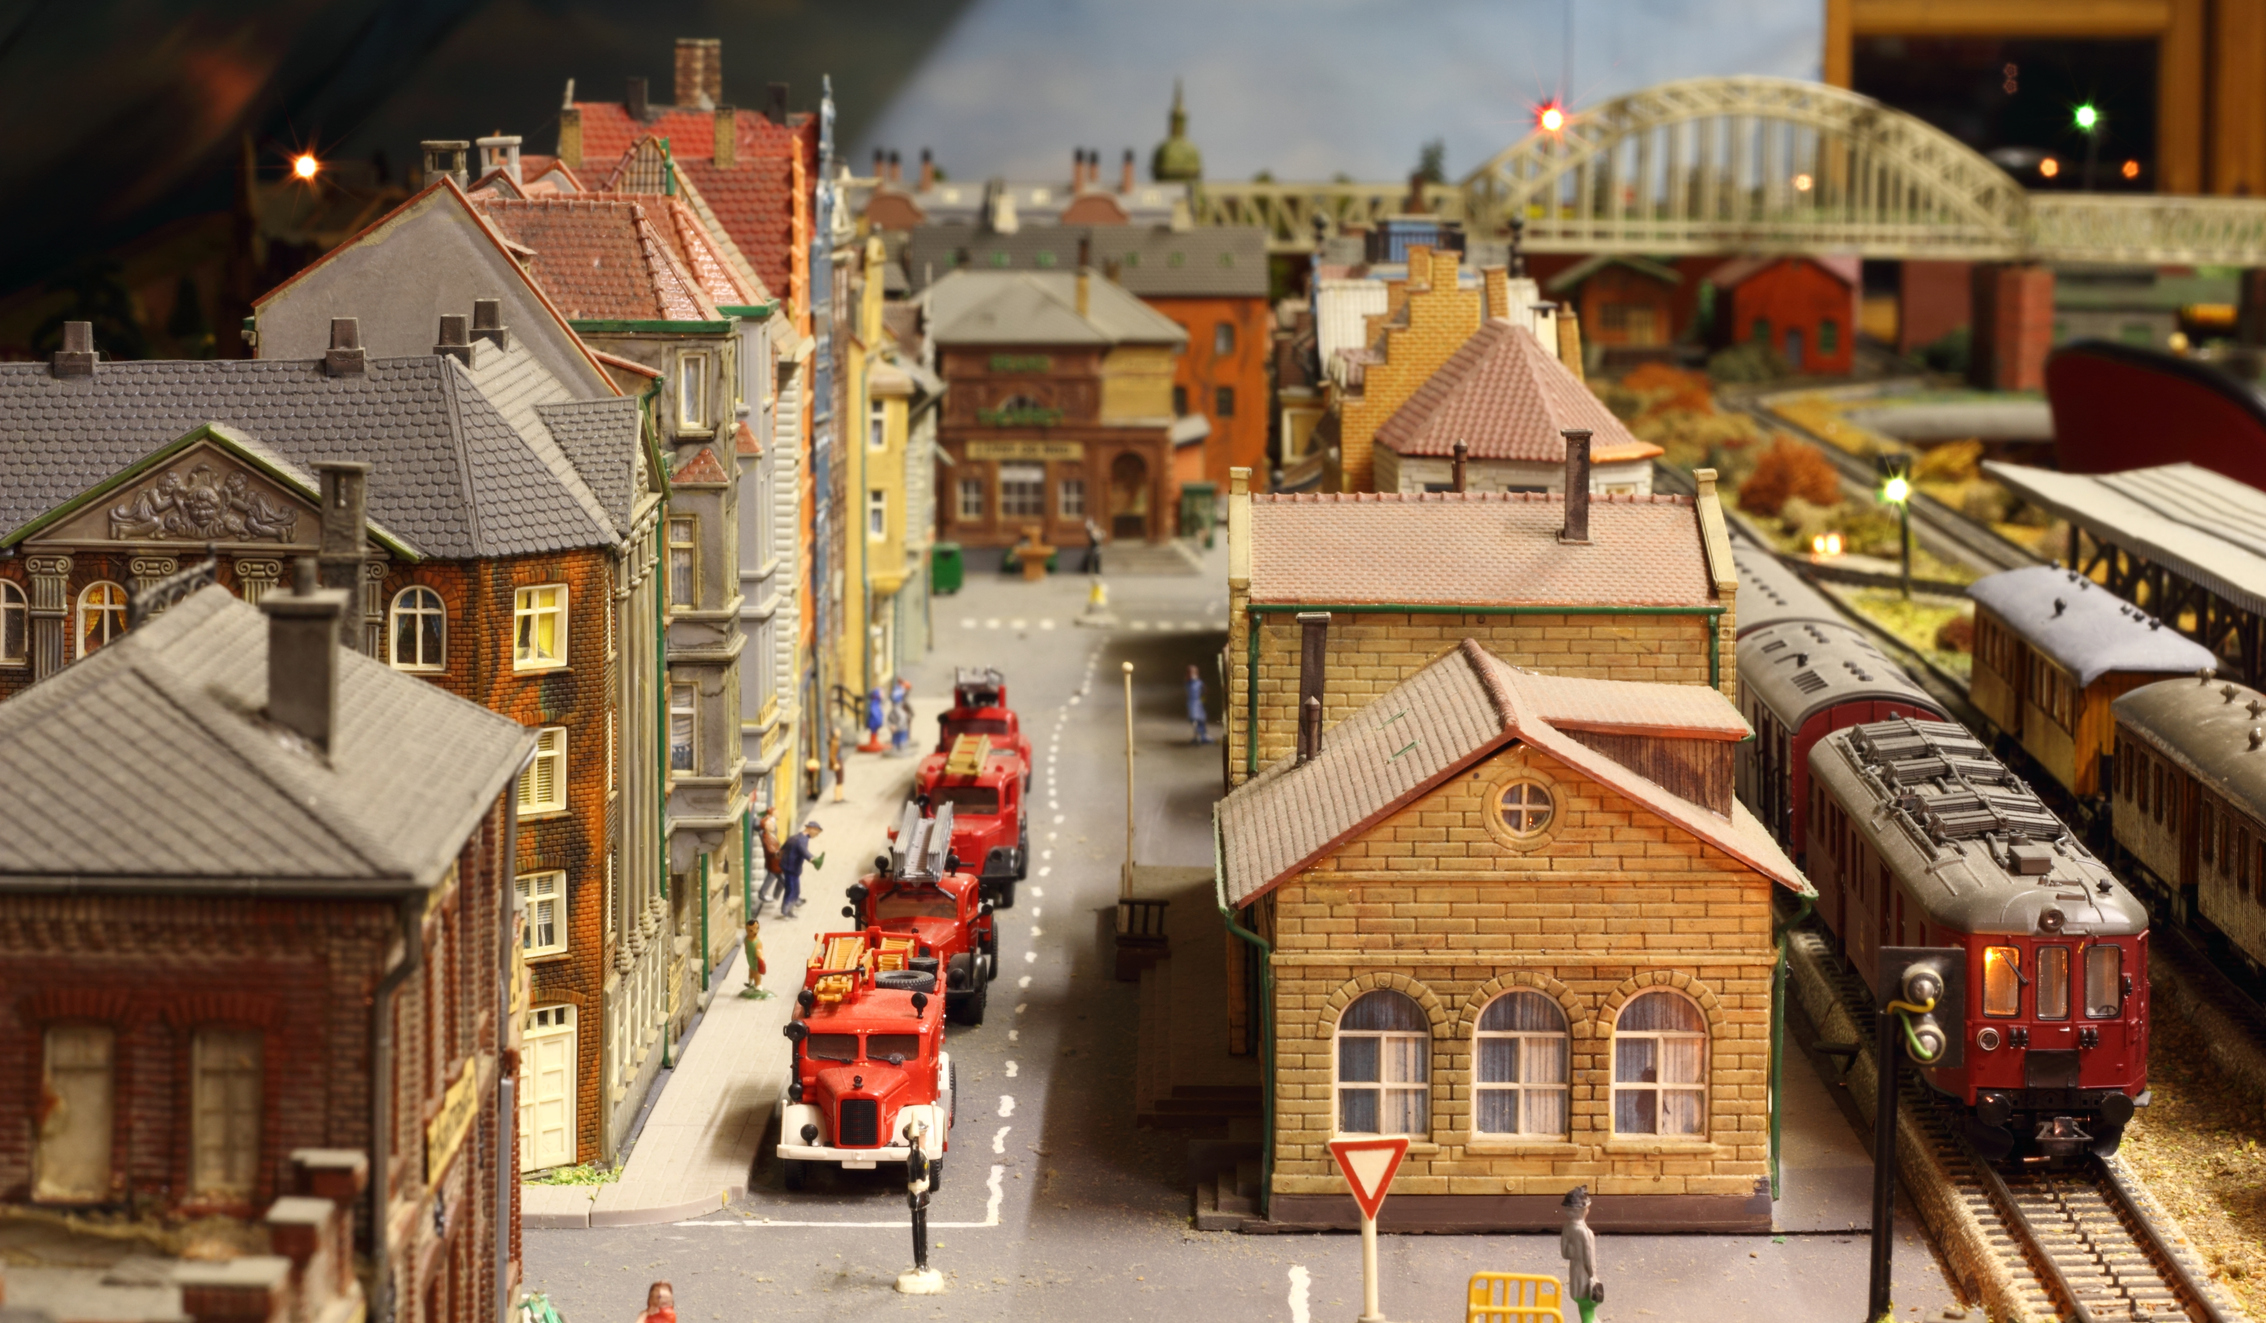 Model railroad layout with fire engines